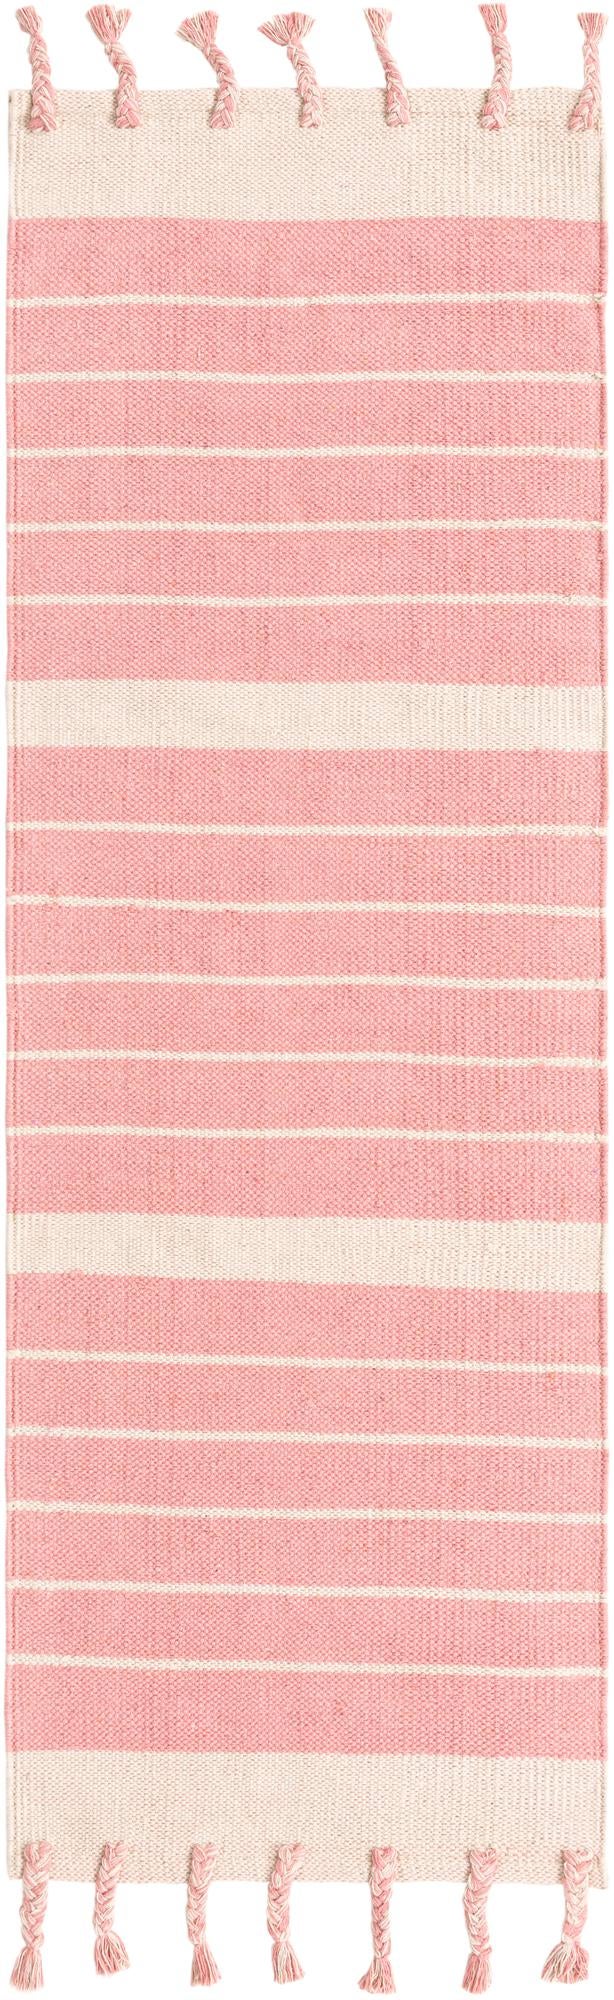 rugpal clara solid/striped area rug collection